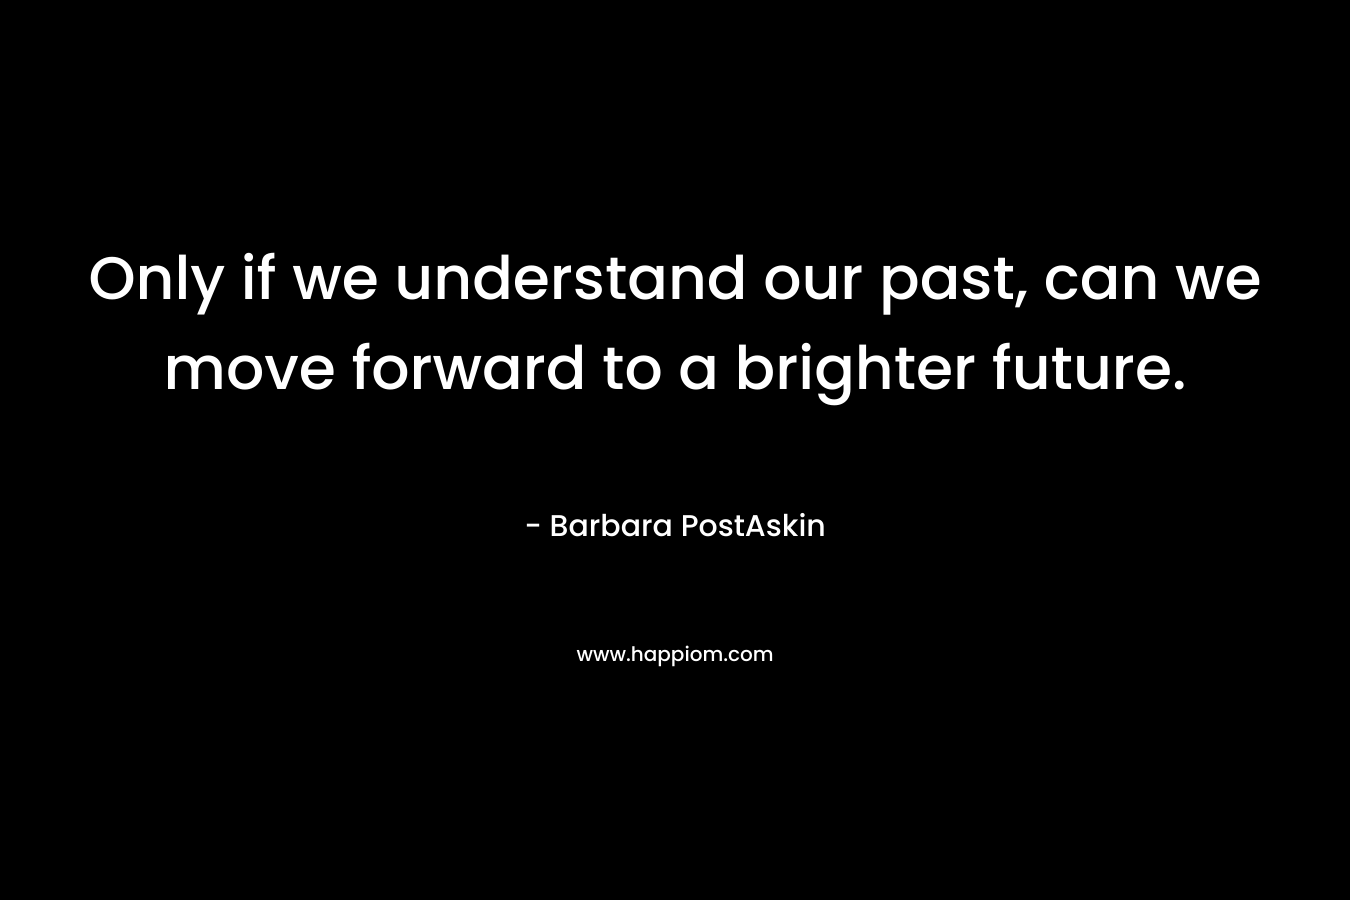 Only if we understand our past, can we move forward to a brighter future.